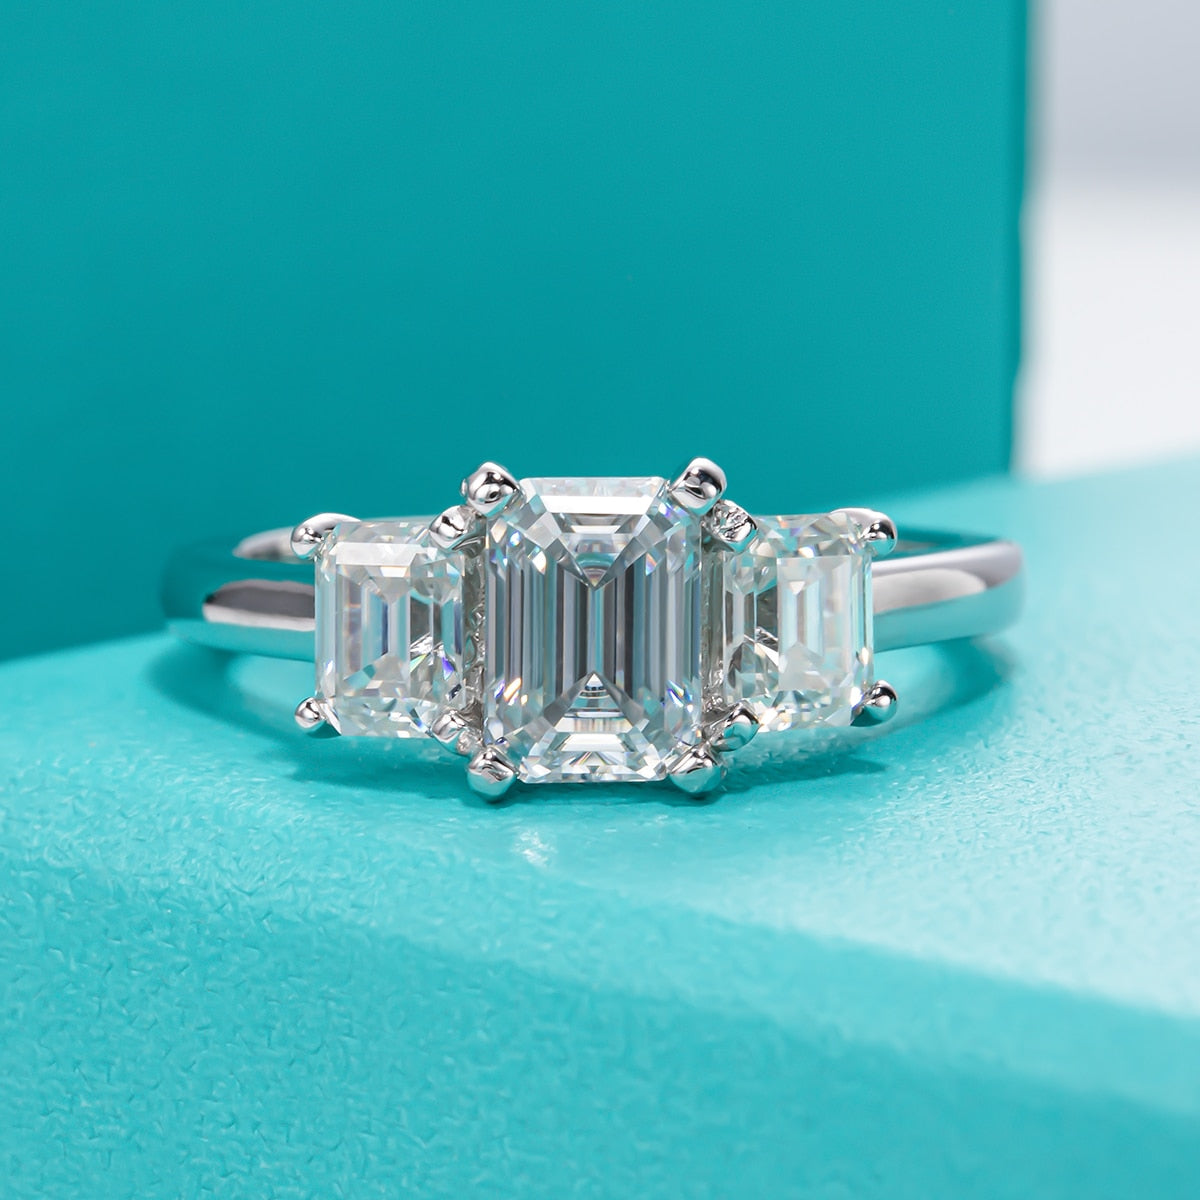 A silver 3 stone ring with a 1CT emerald cut moissanite set between two smaller emerald cut moissanites.